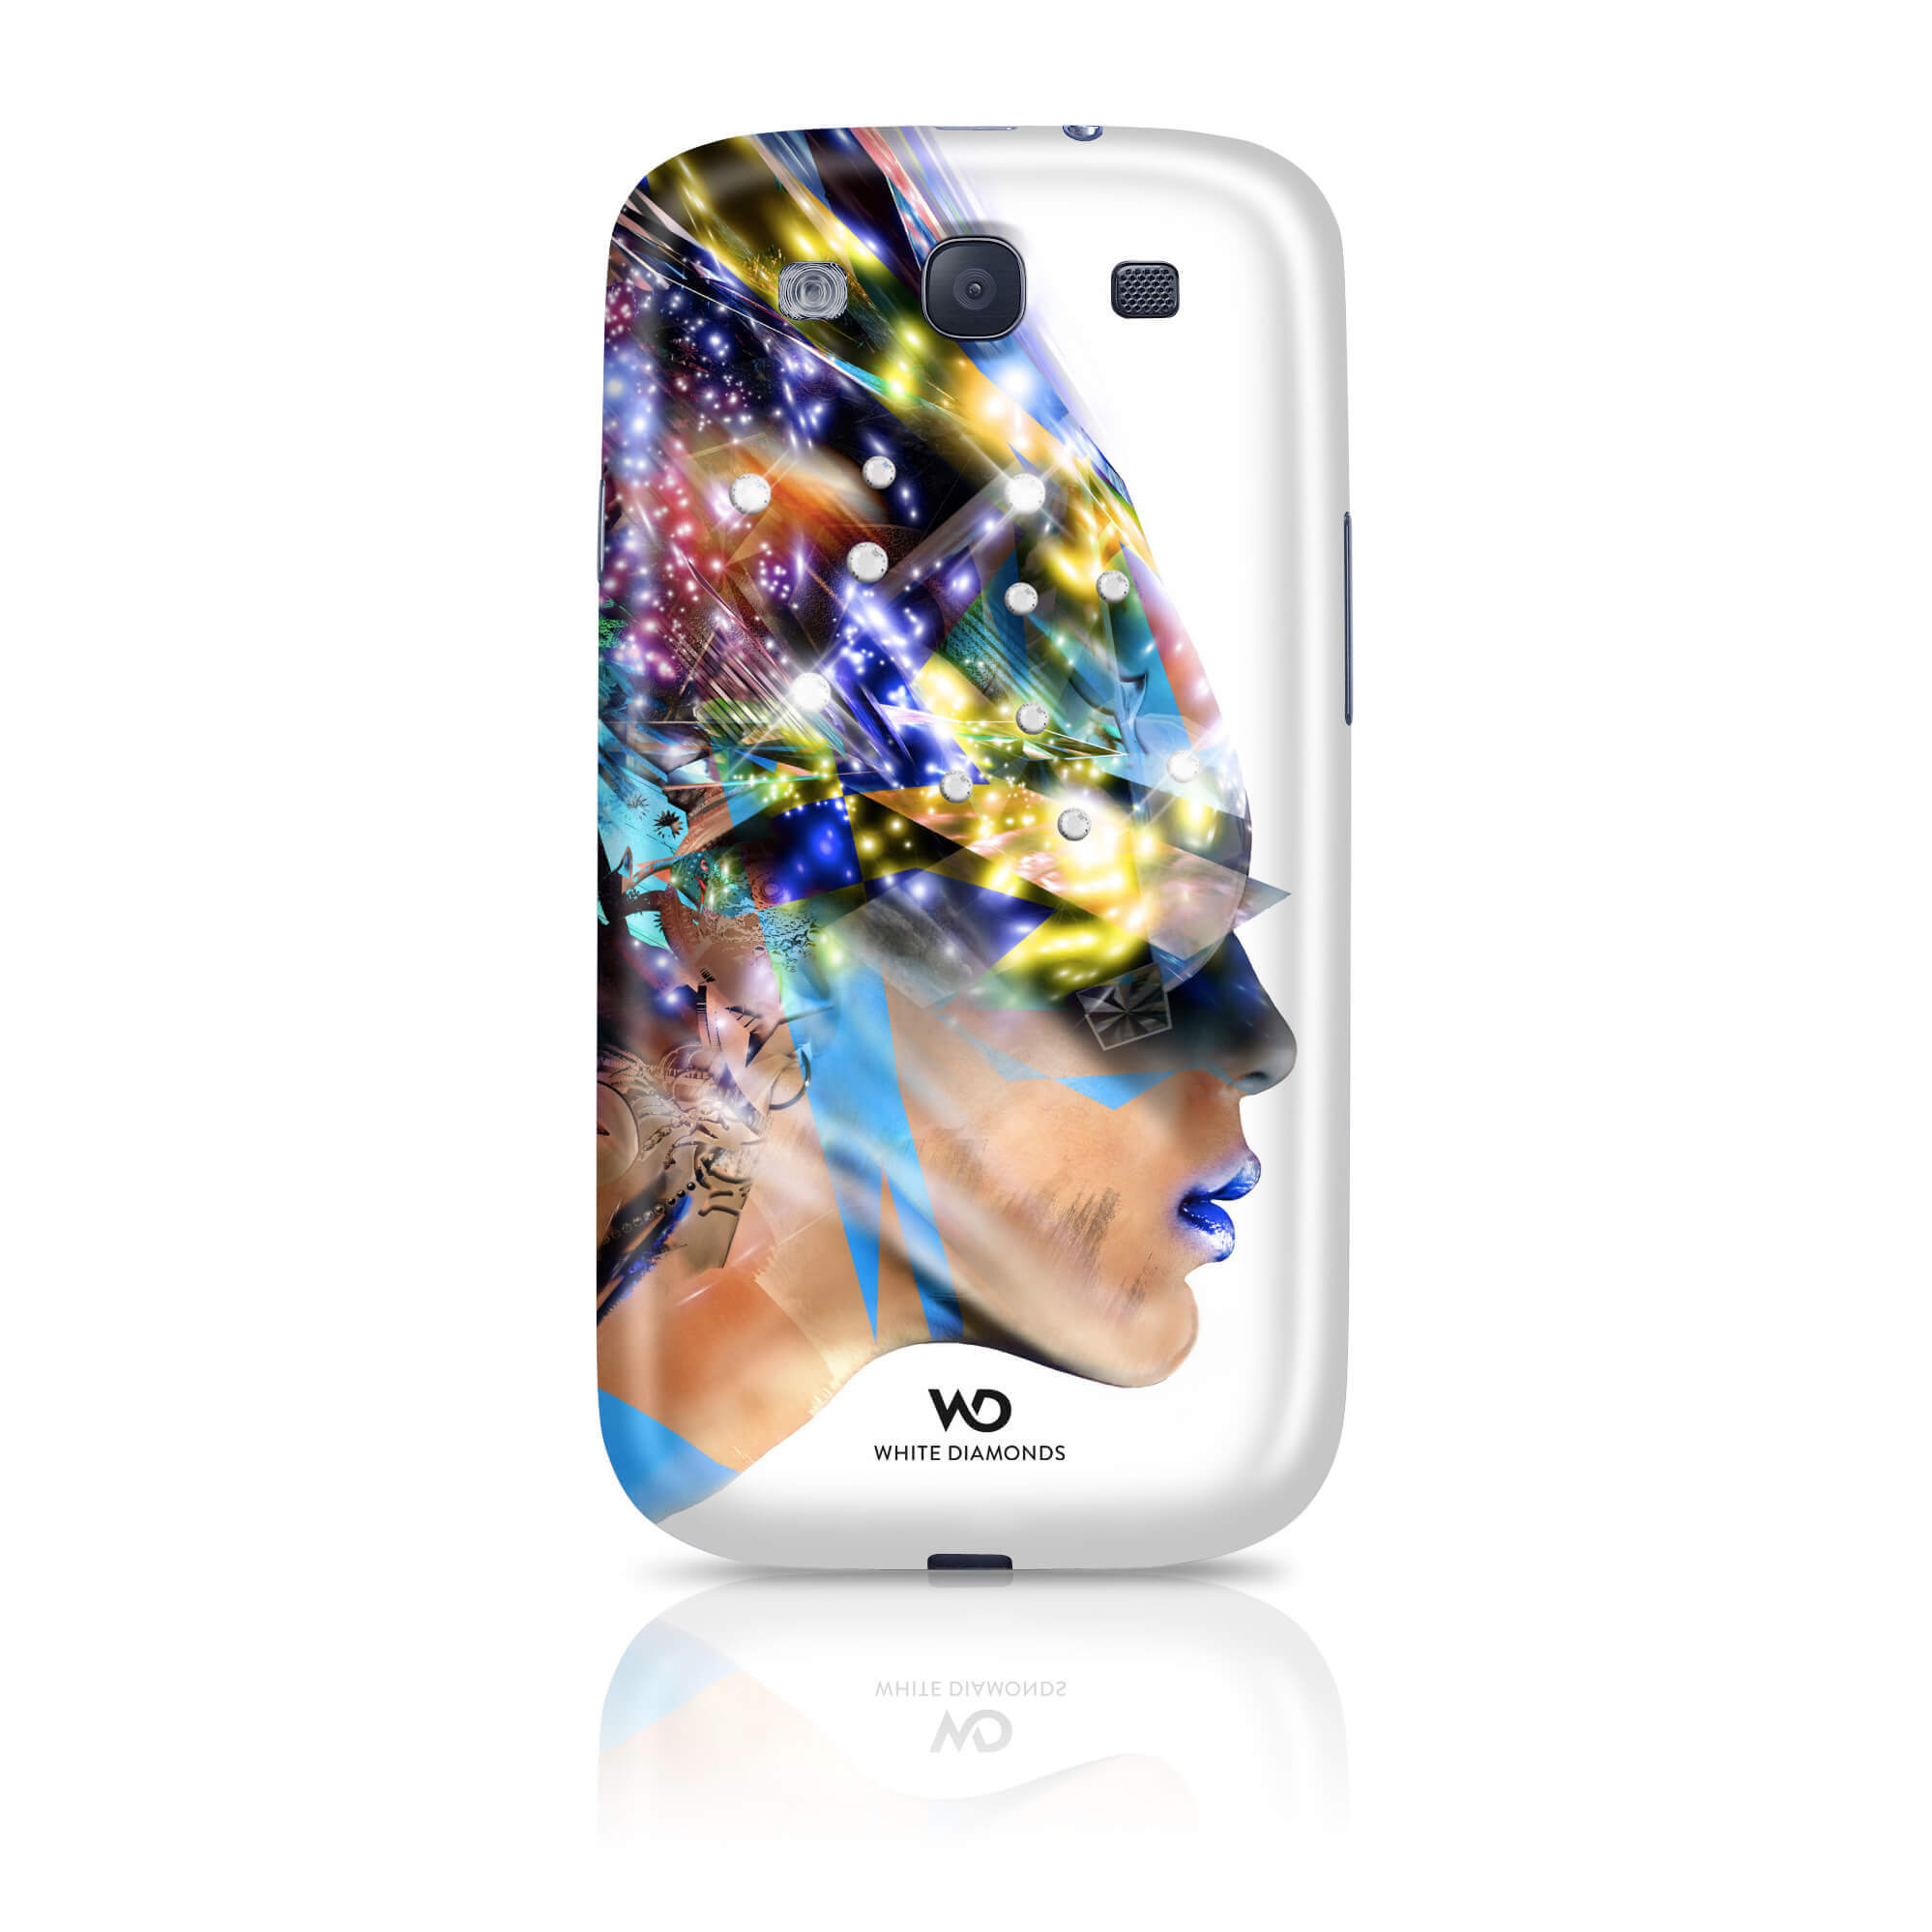 Nafrotiti Mobile Phone Cover for Samsung Galaxy S III, whit